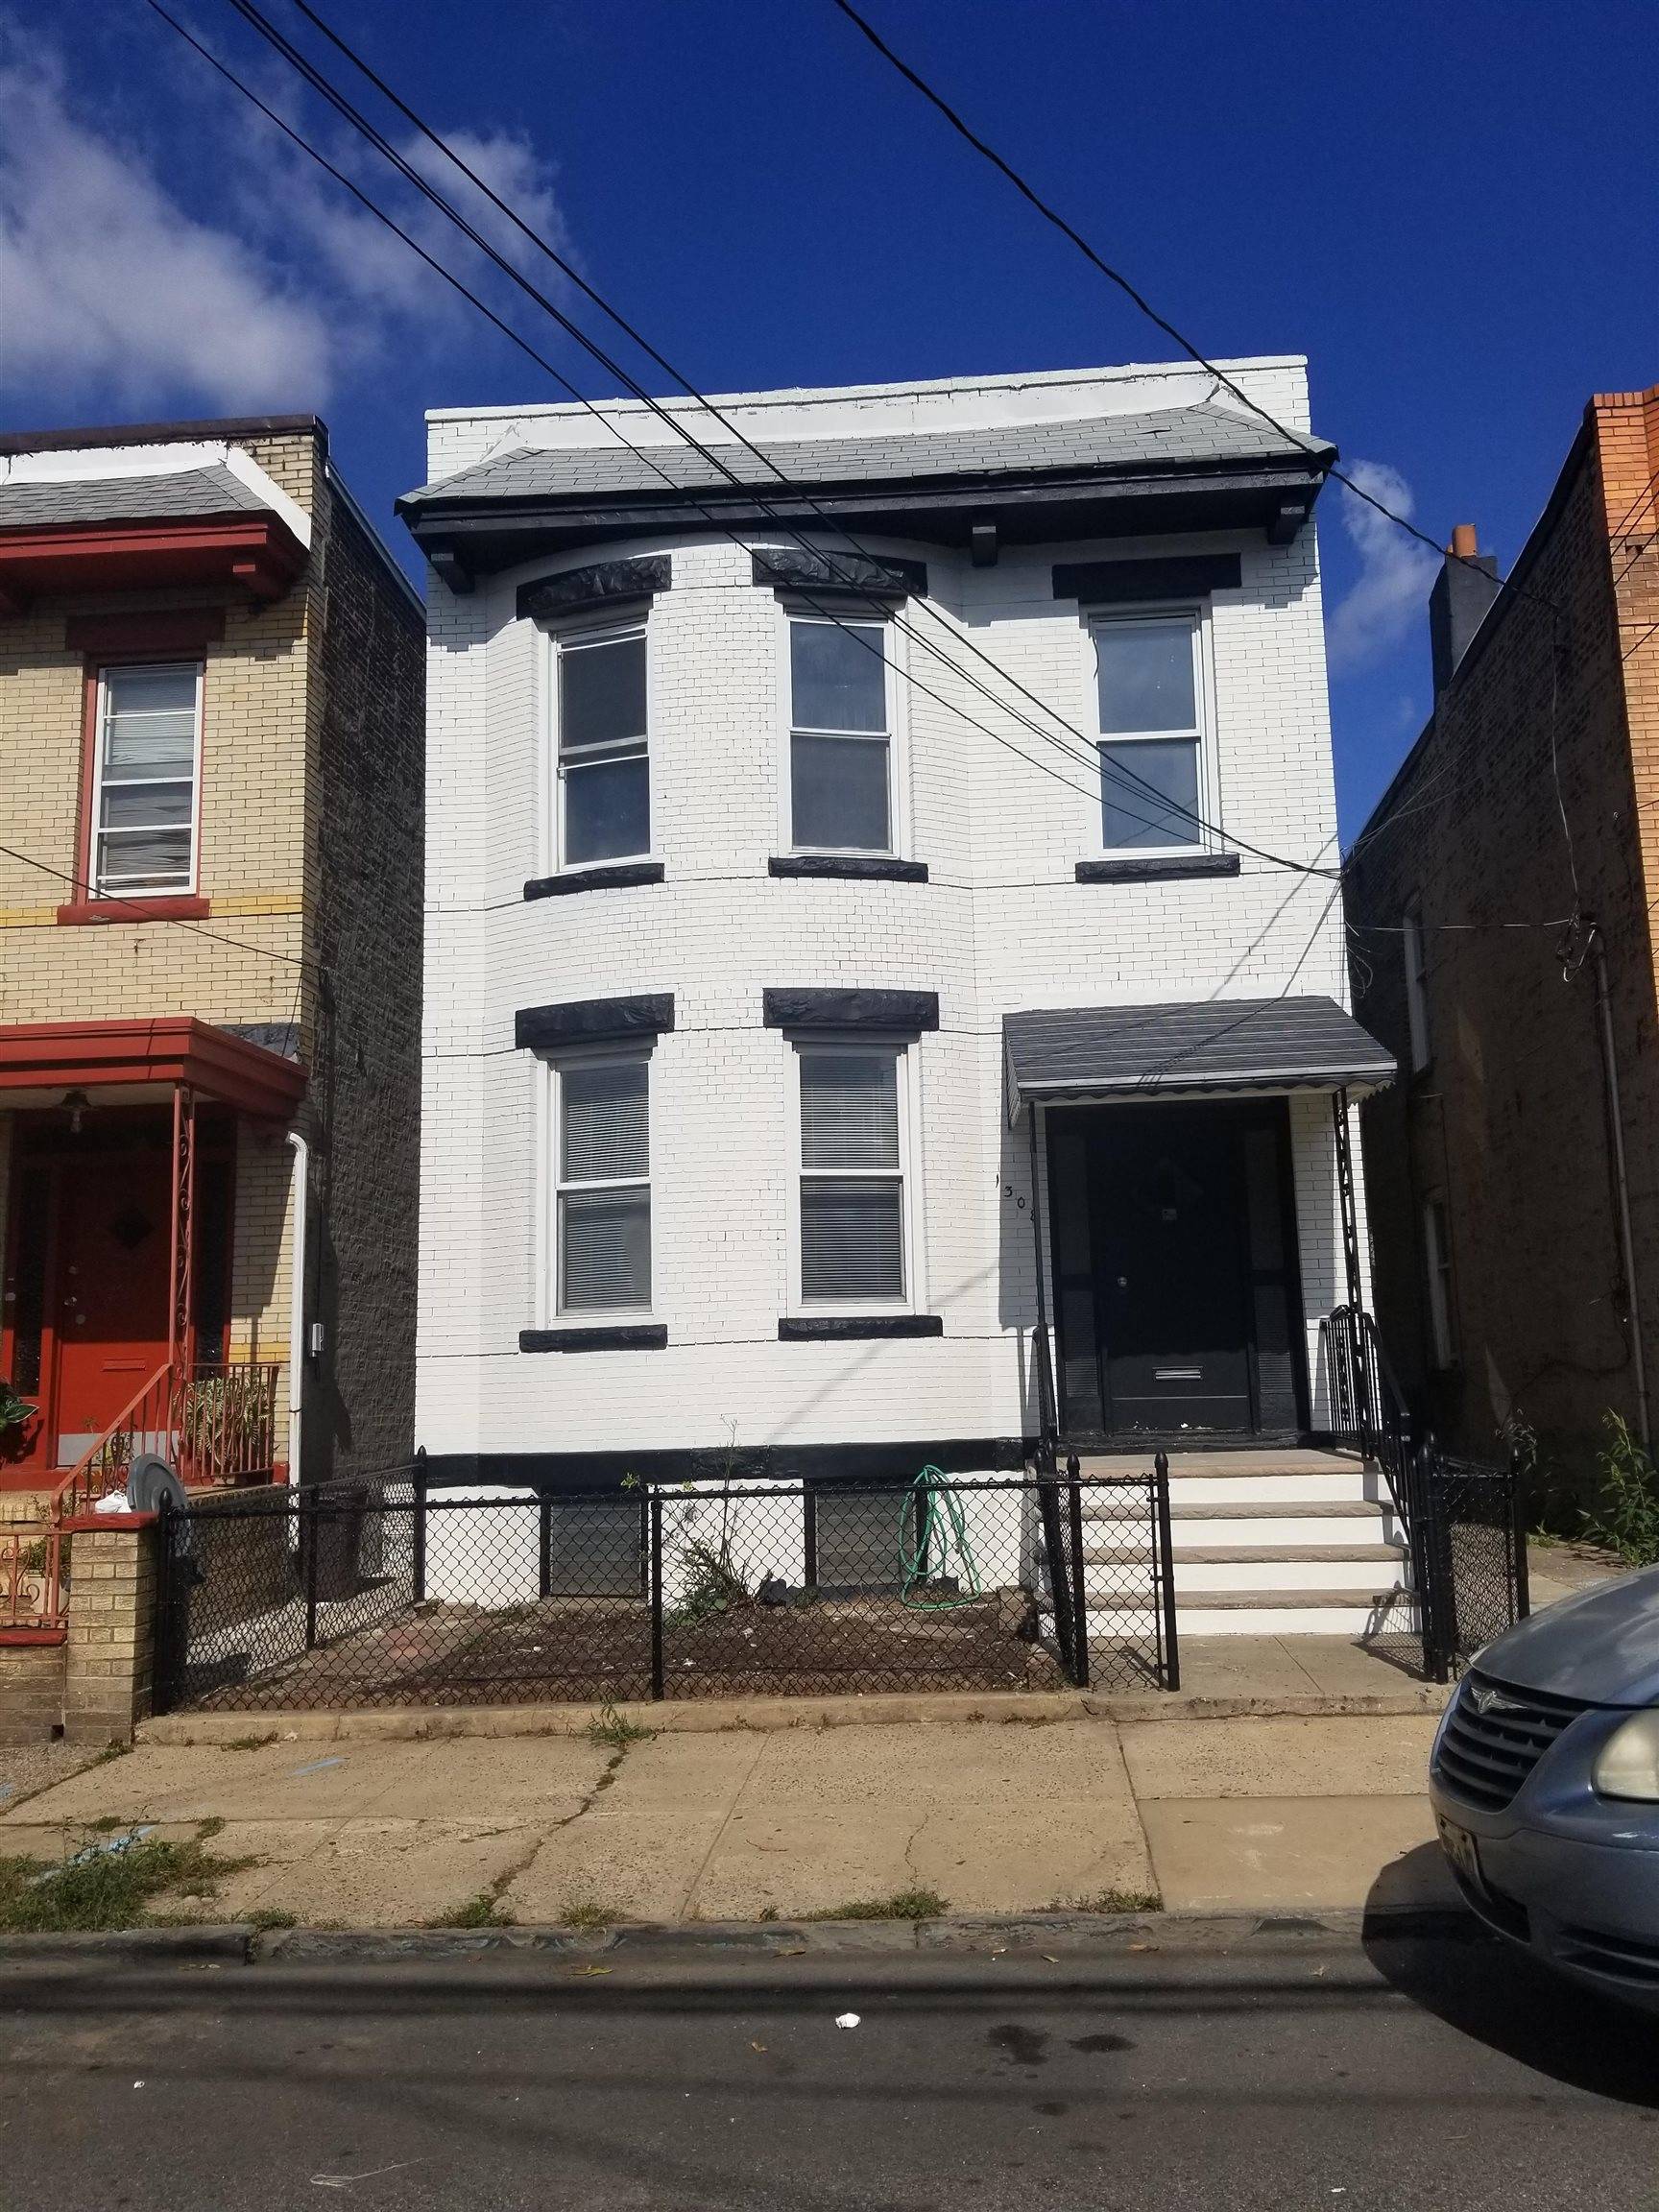 1308 27TH ST Multi-Family New Jersey